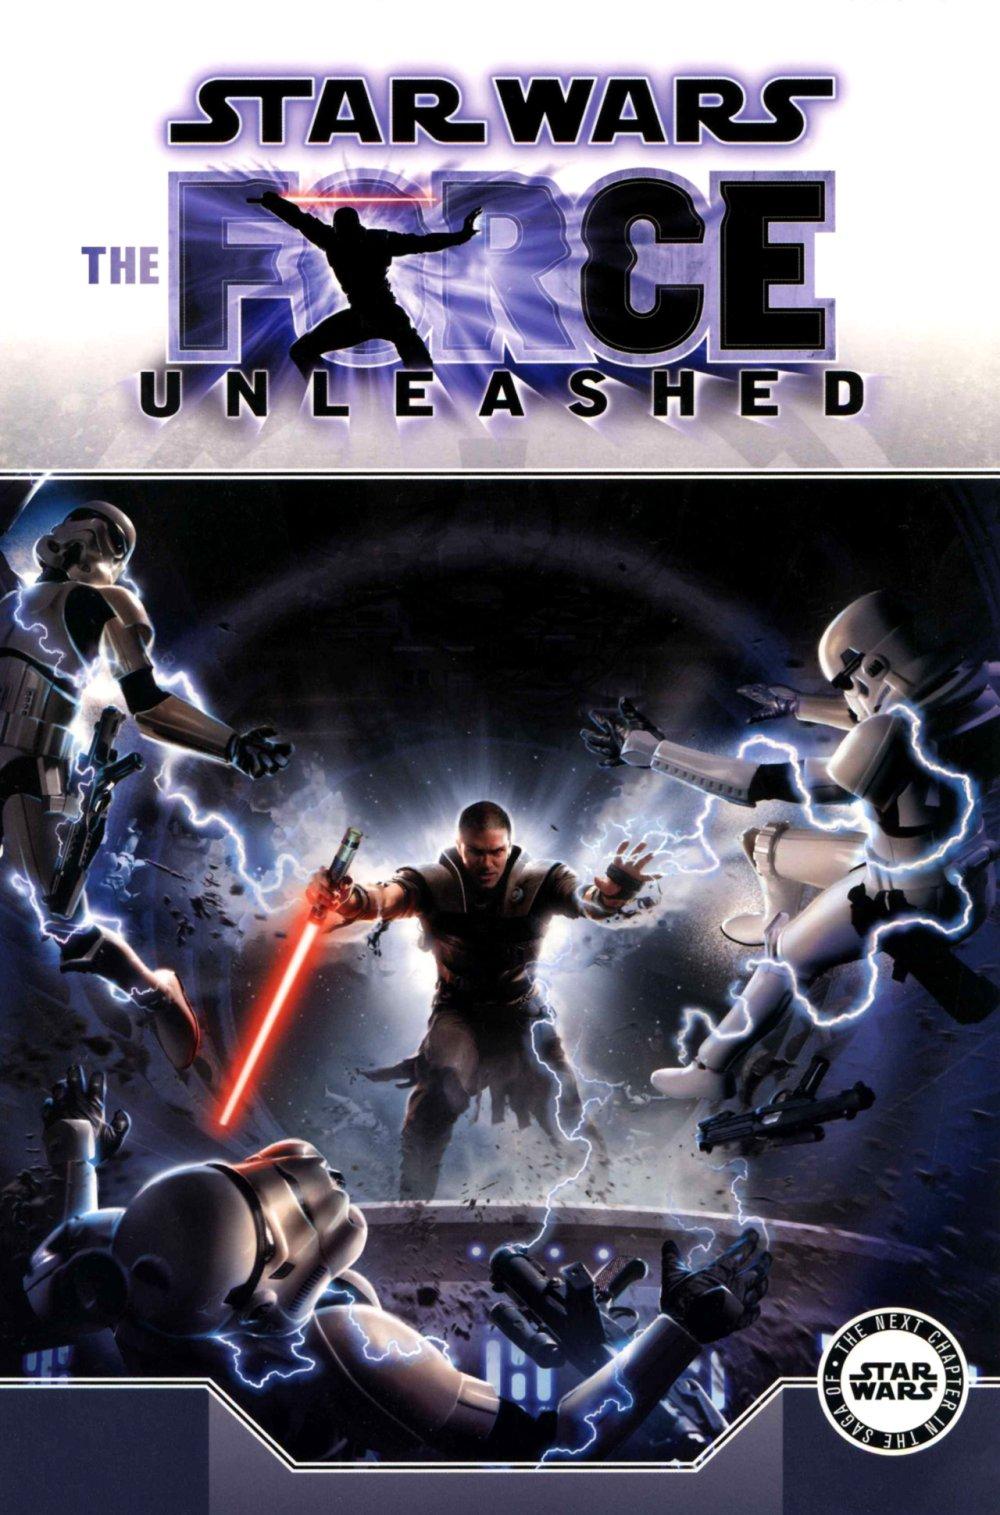 Star Wars: The Force Unleashed Vol. 1 #1